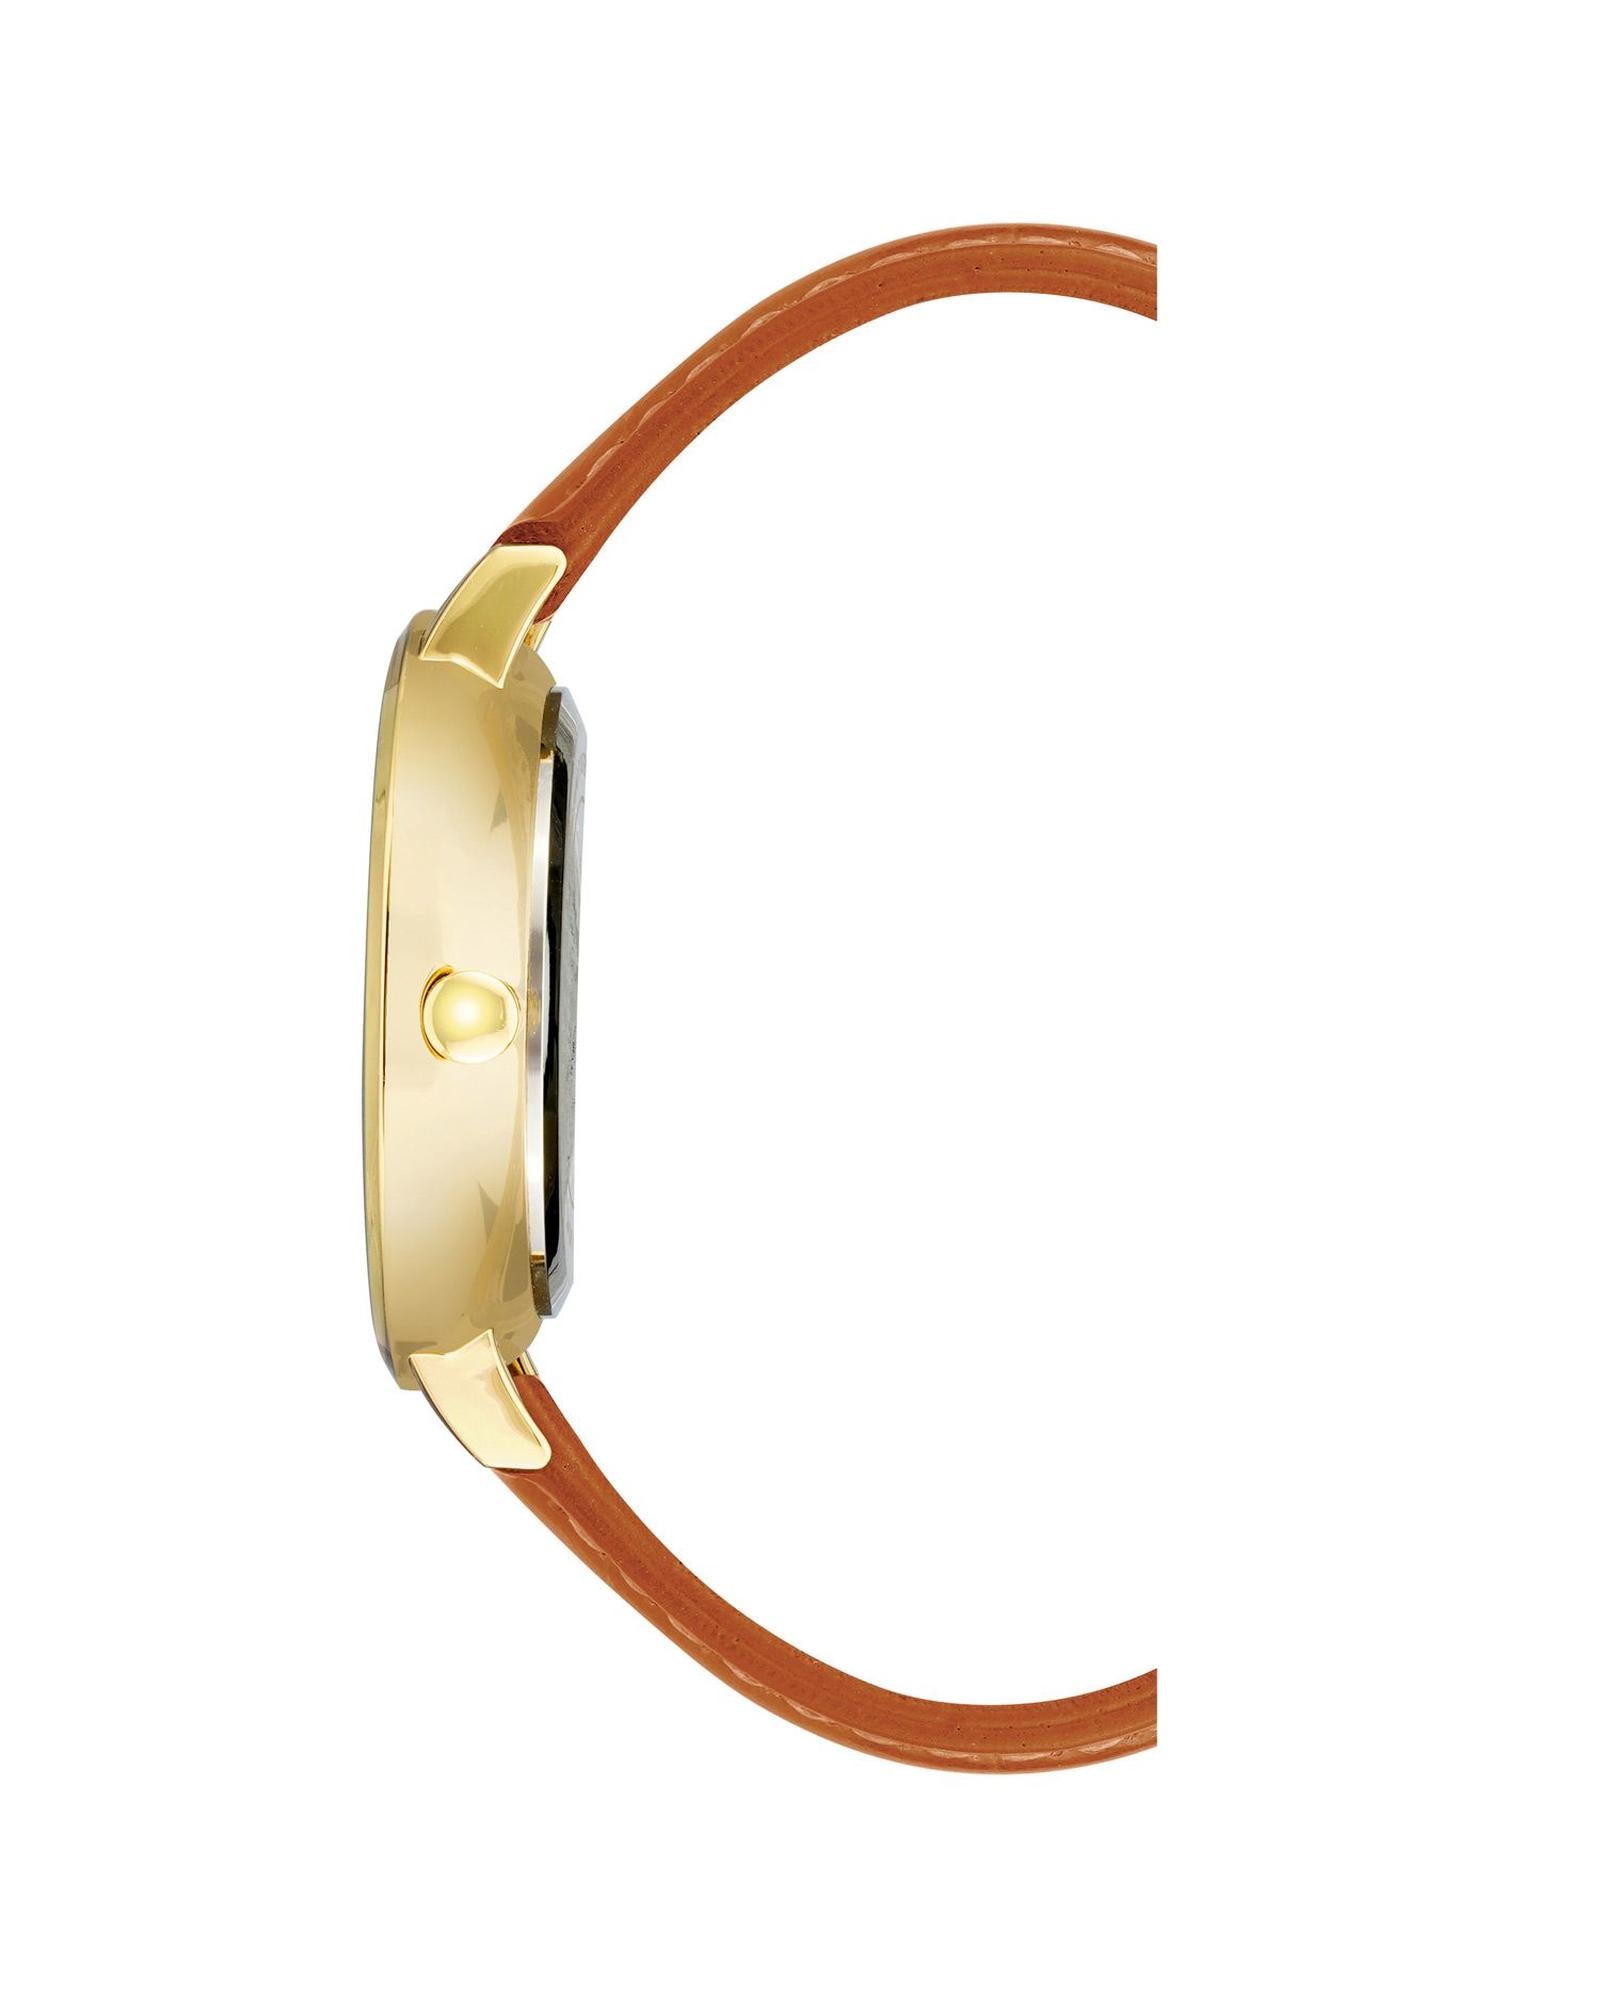 Gold Fashion Watch with Rhine Stone Facing and Brown Leatherette Wristband One Size Women-Women&